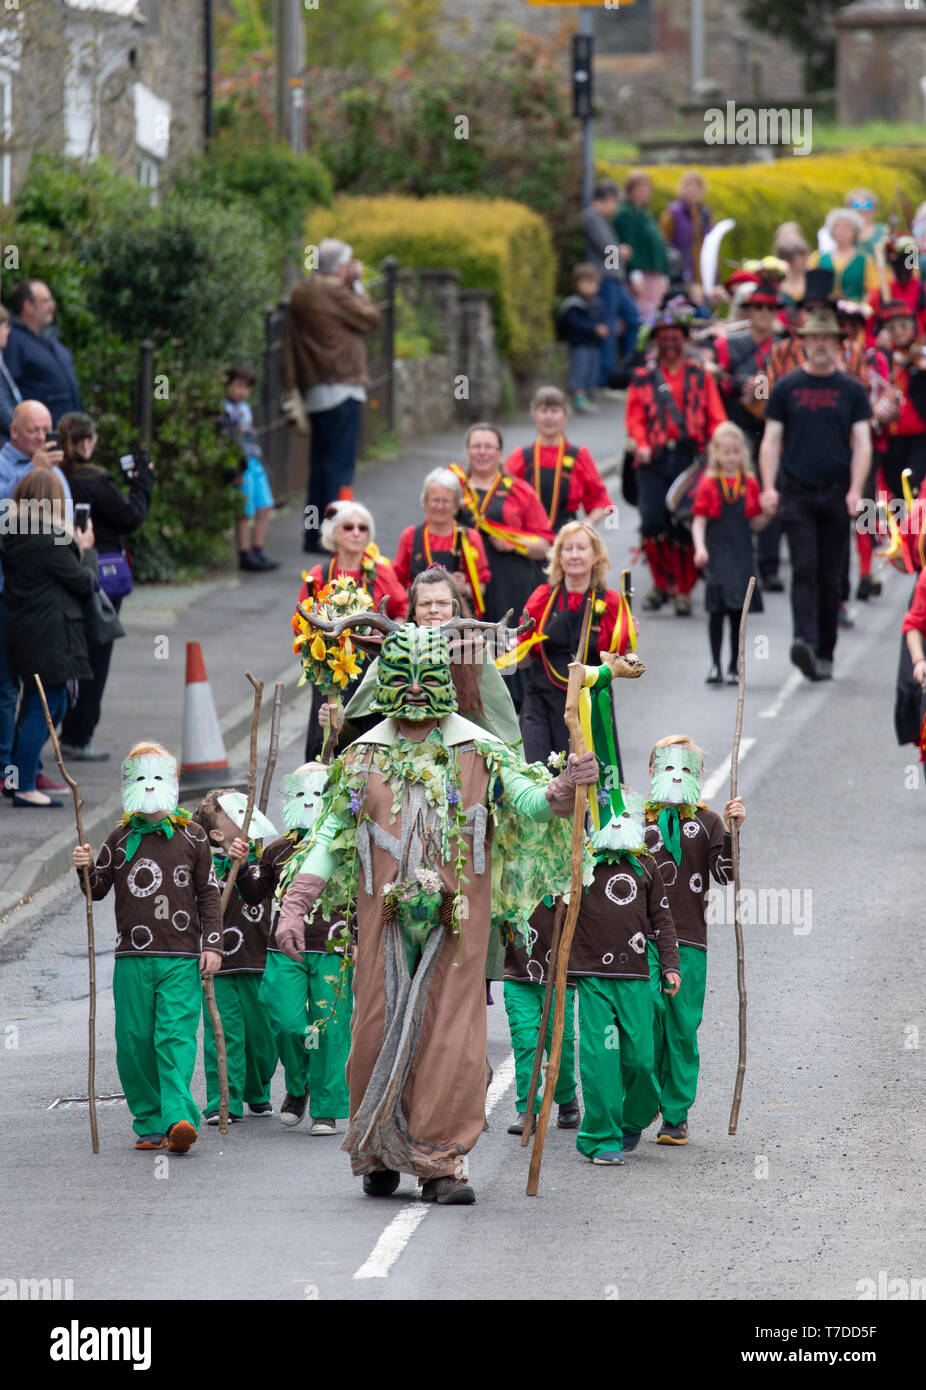 The Green Man Festival 2019,  held in the village of Clun inn Shropshire England. The festival has Pagan origins relating to the changing seasons. Stock Photo